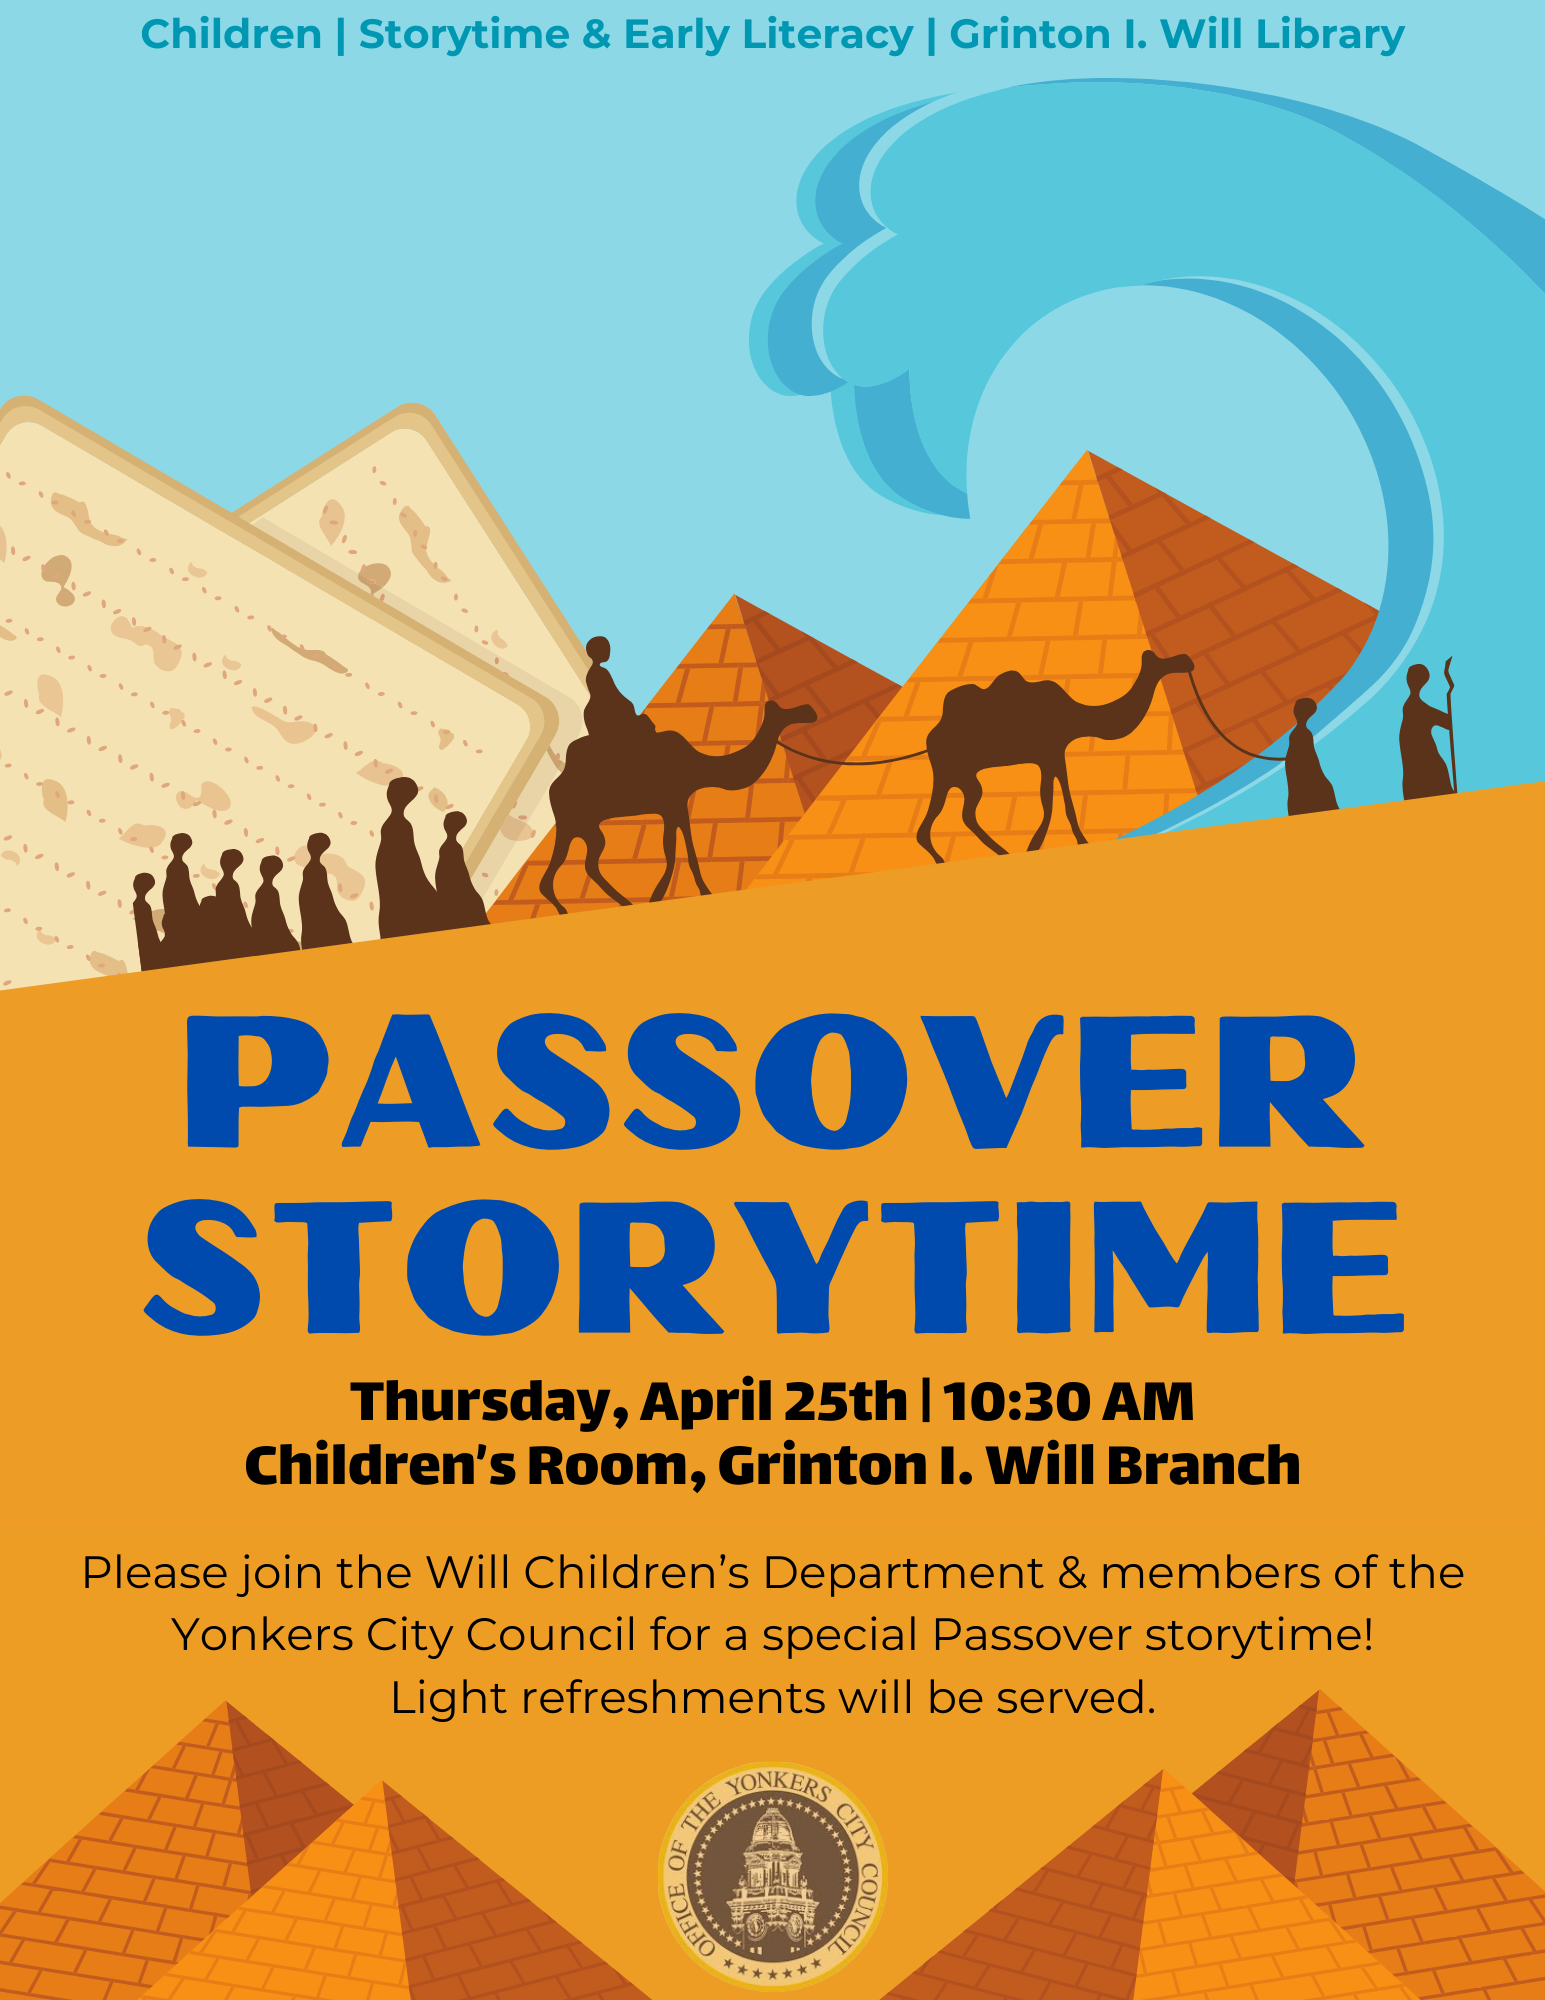 flyer with passover image of egypt and text of program information